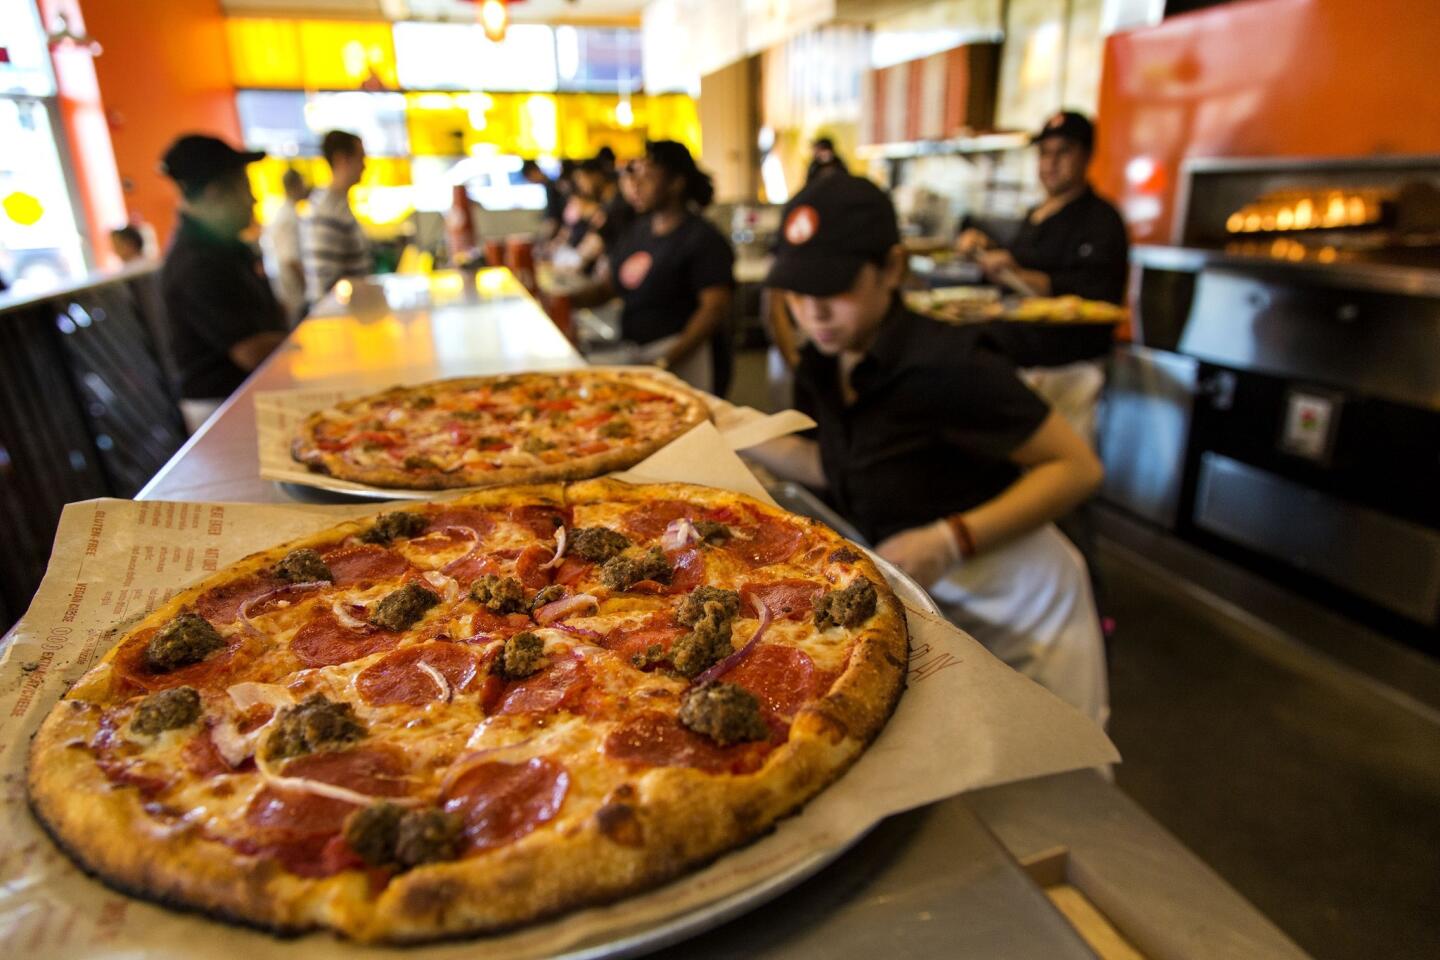 A Meat Eater pizza awaits pickup at Blaze Pizza in Pasadena. The chain has six locations now in Southern California, with more coming this year.